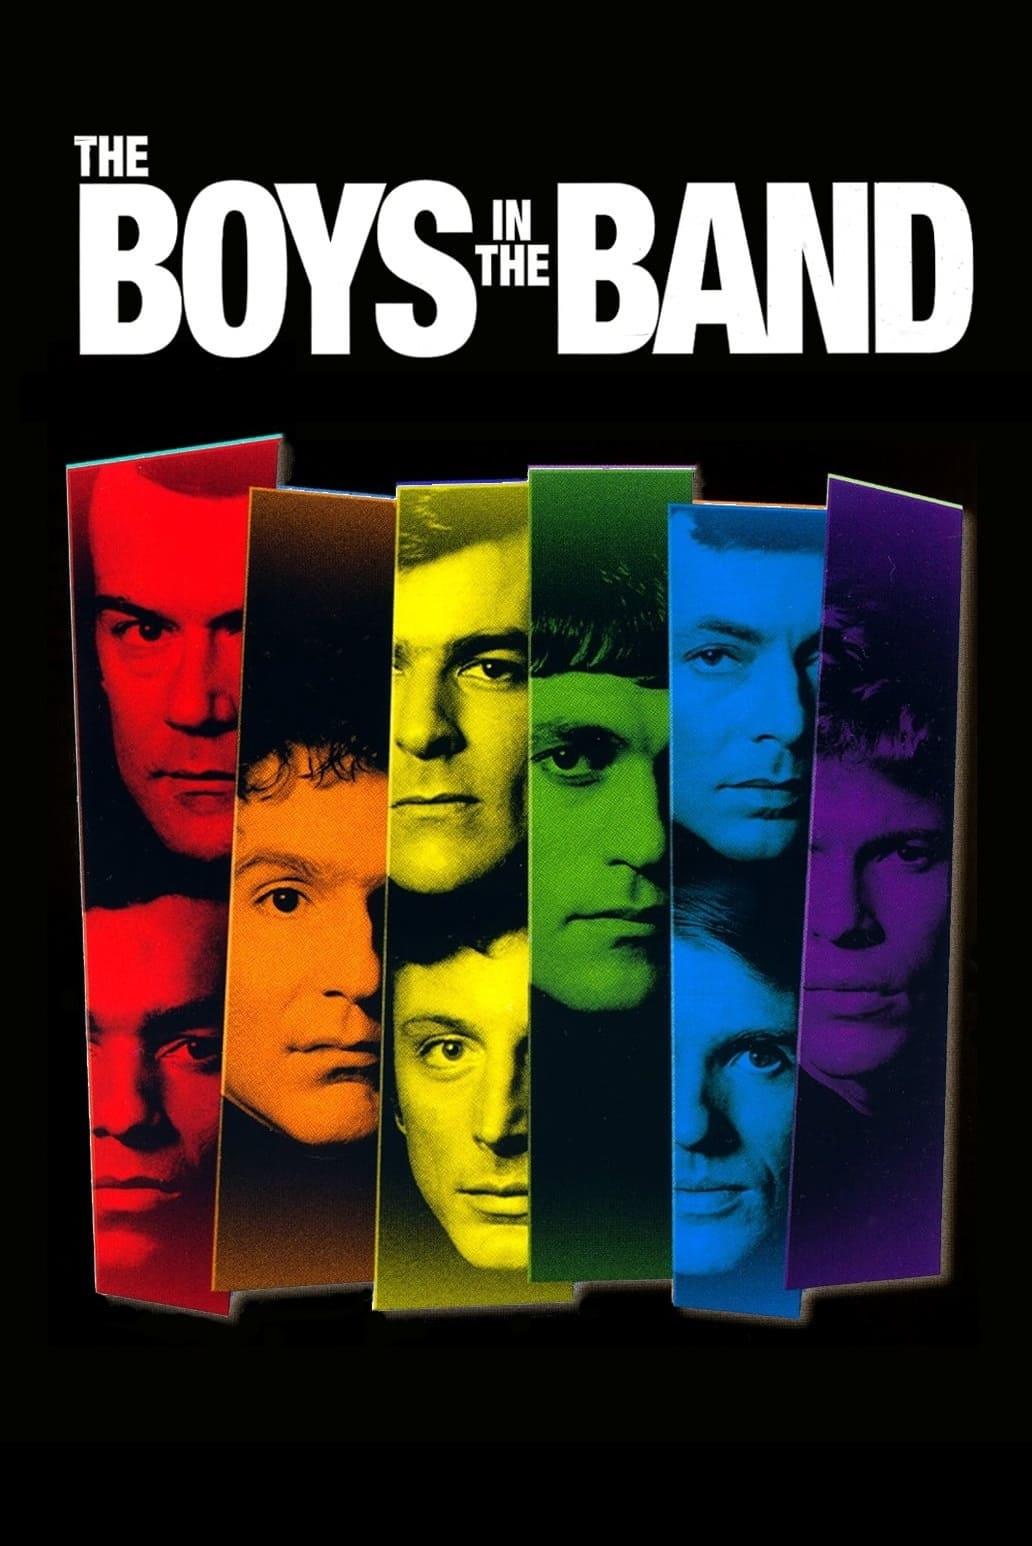 The Boys in the Band poster